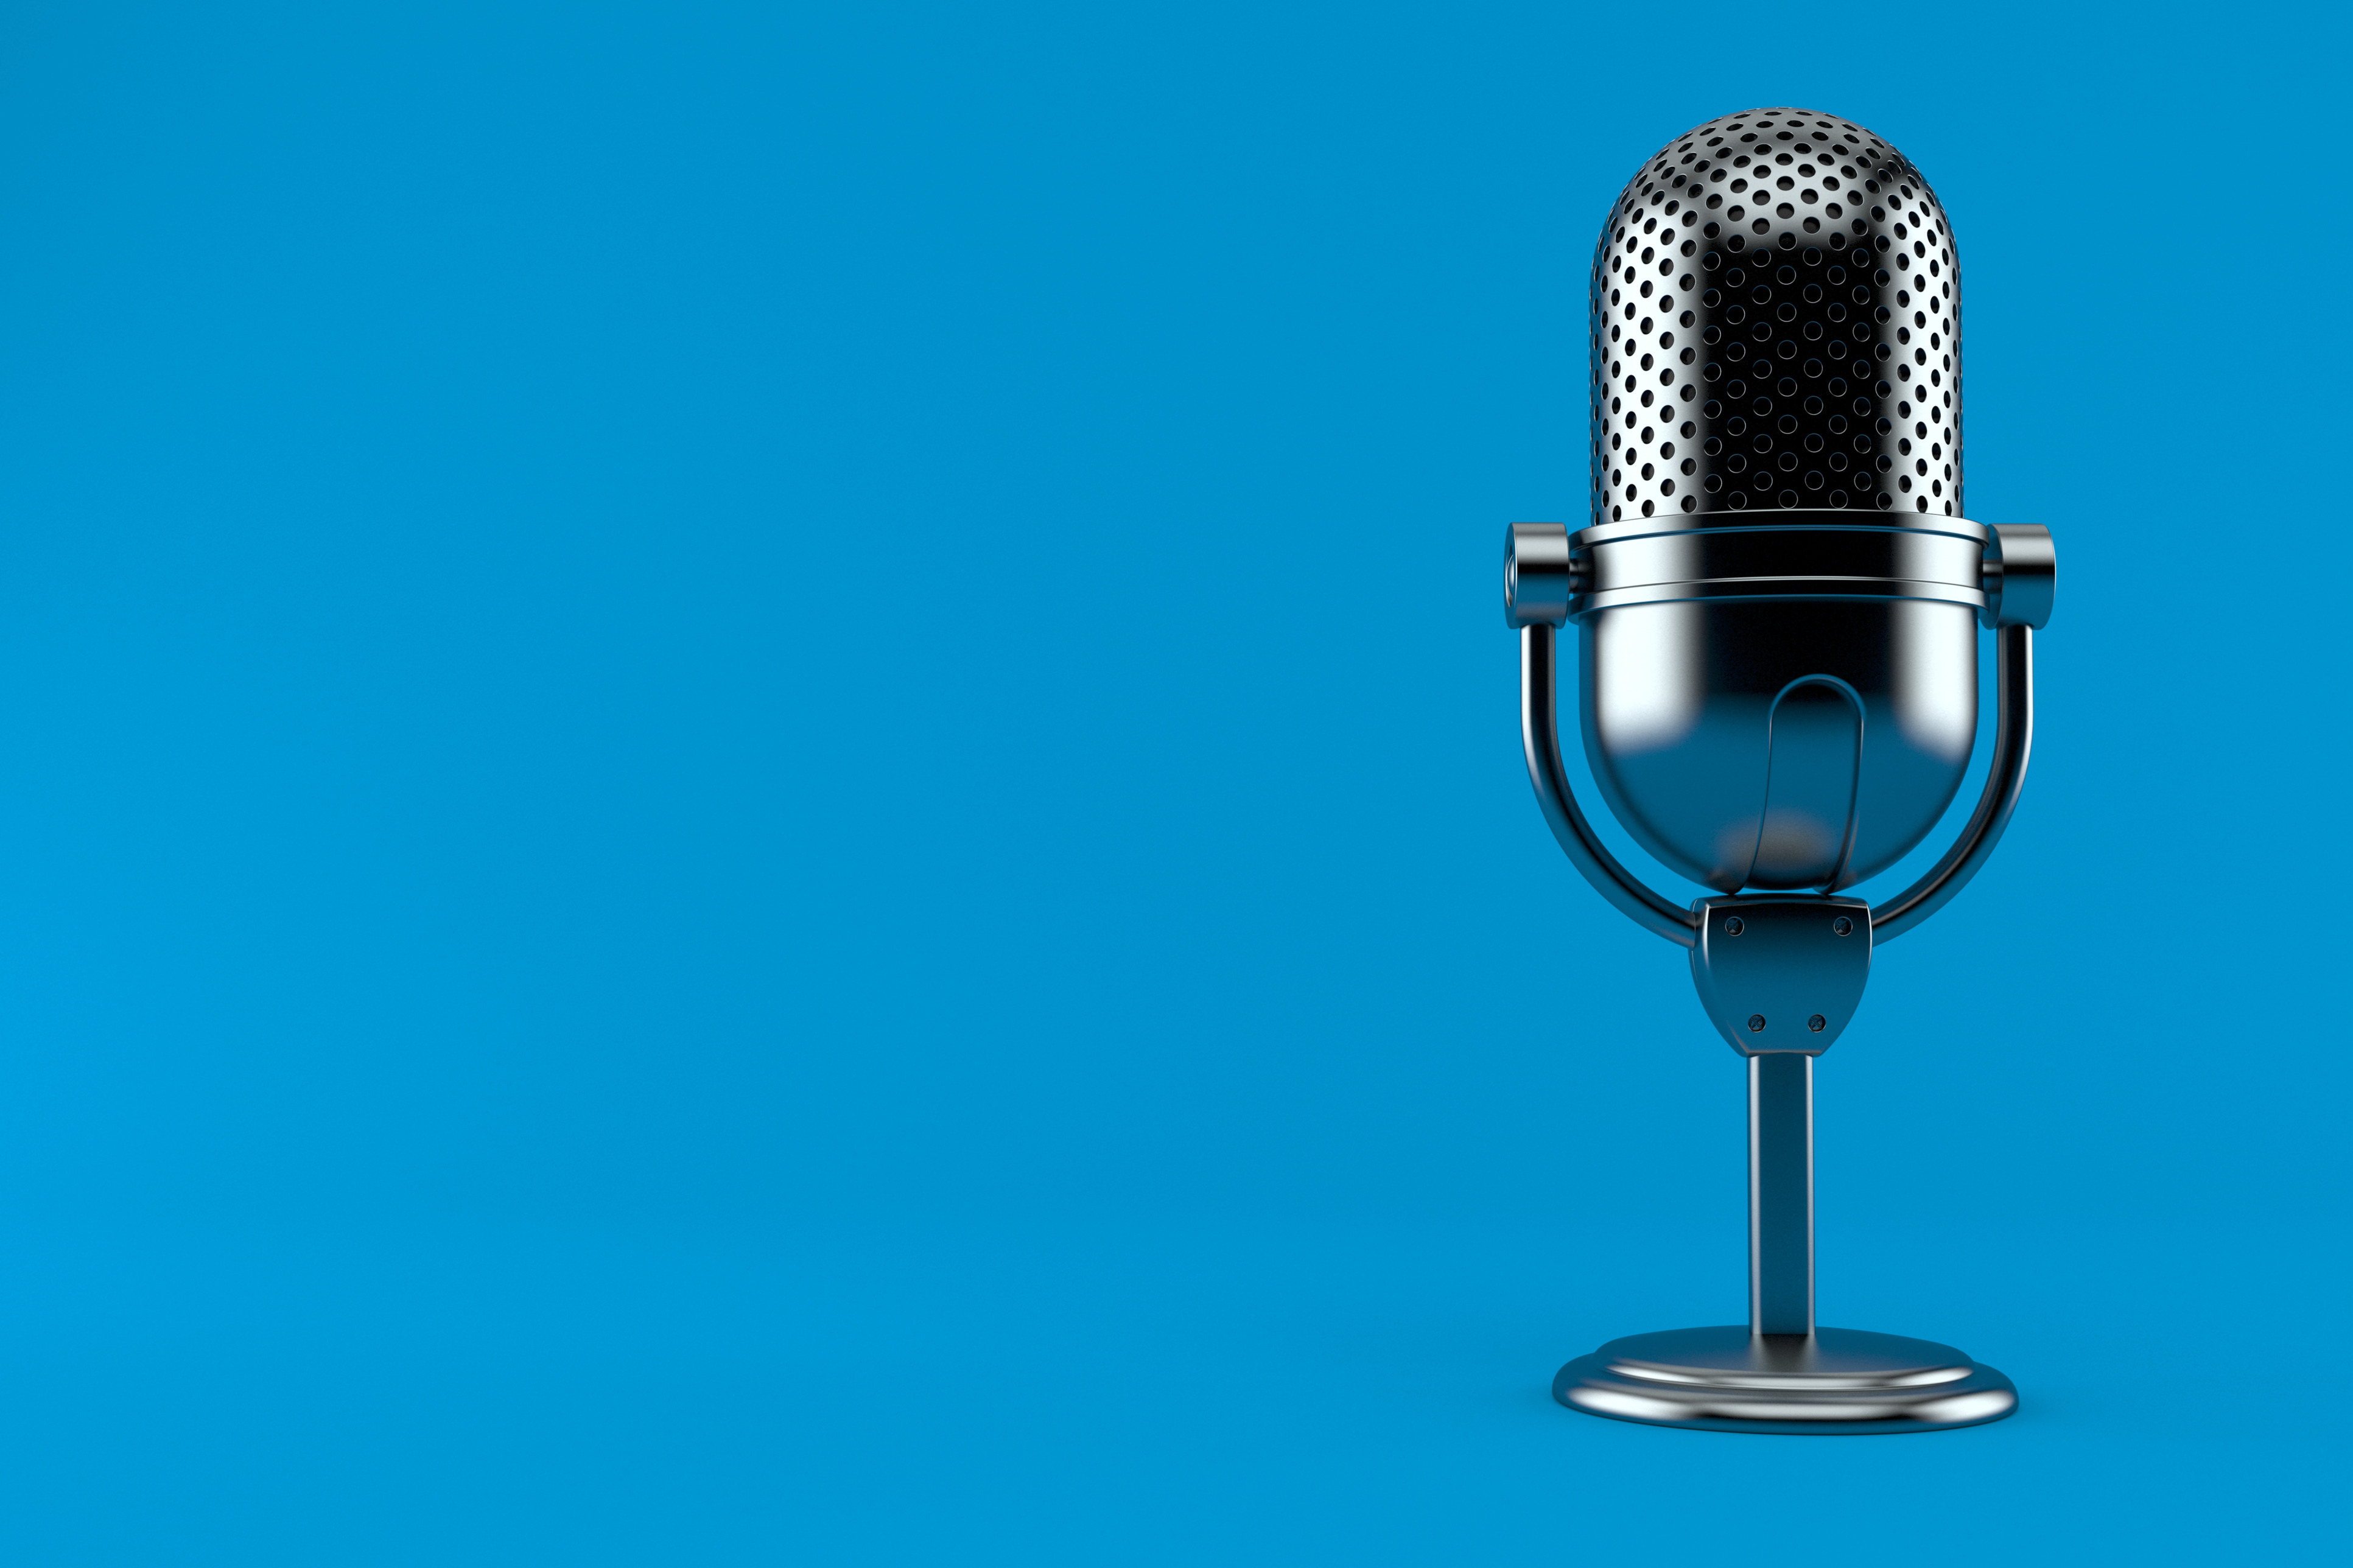 Chrome microphone on blue background